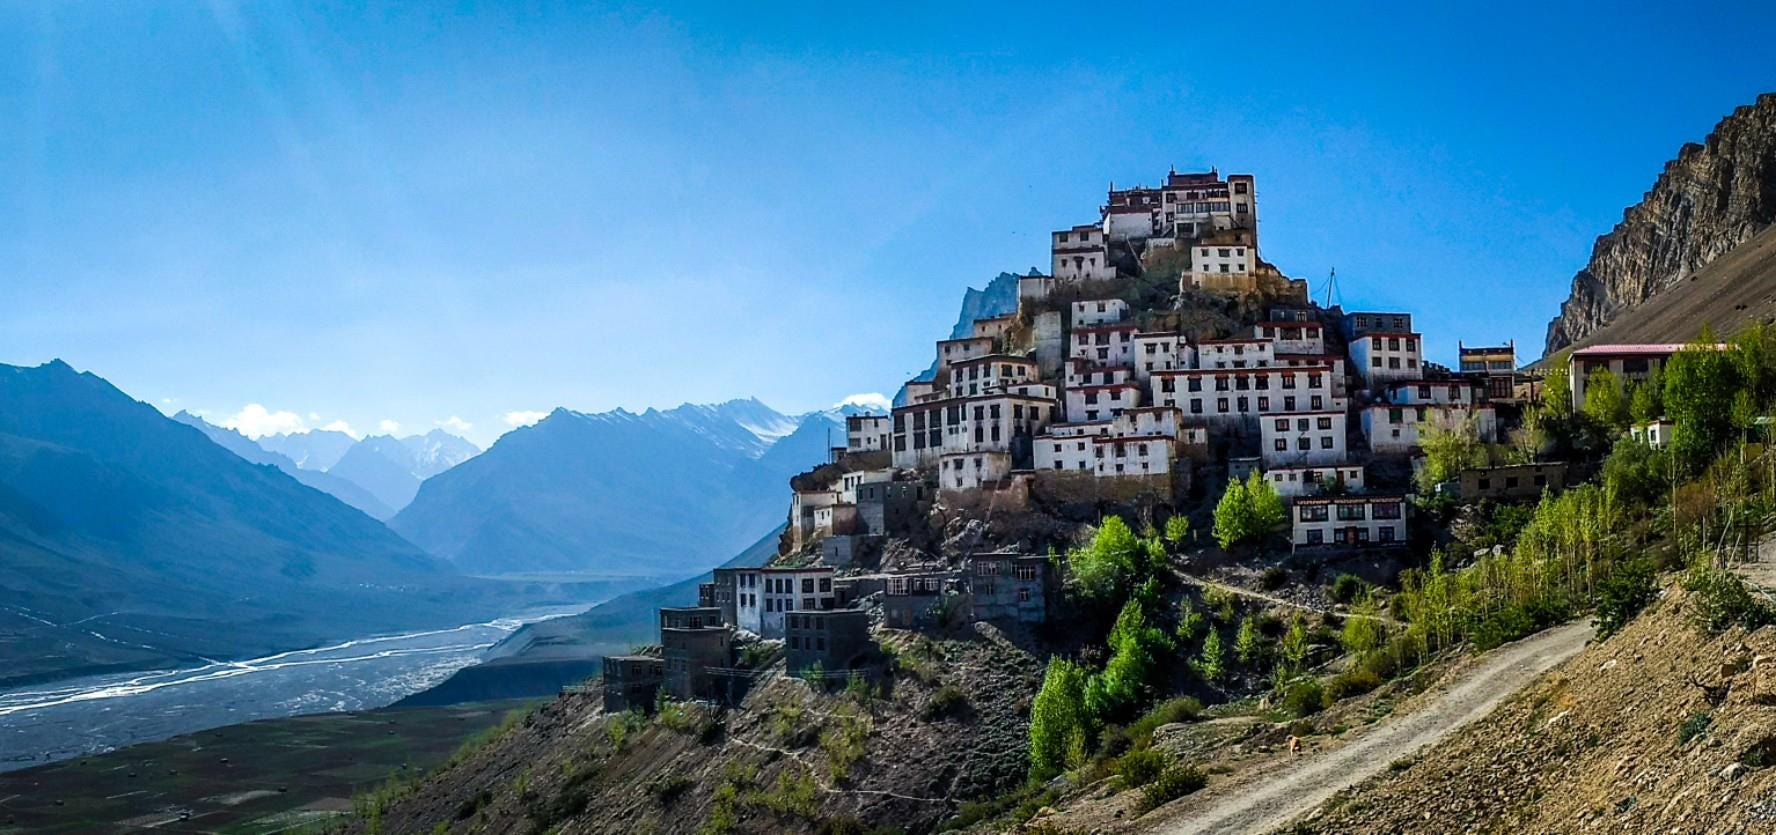 An Unforgettable Trip to Spiti Valley in Himachal